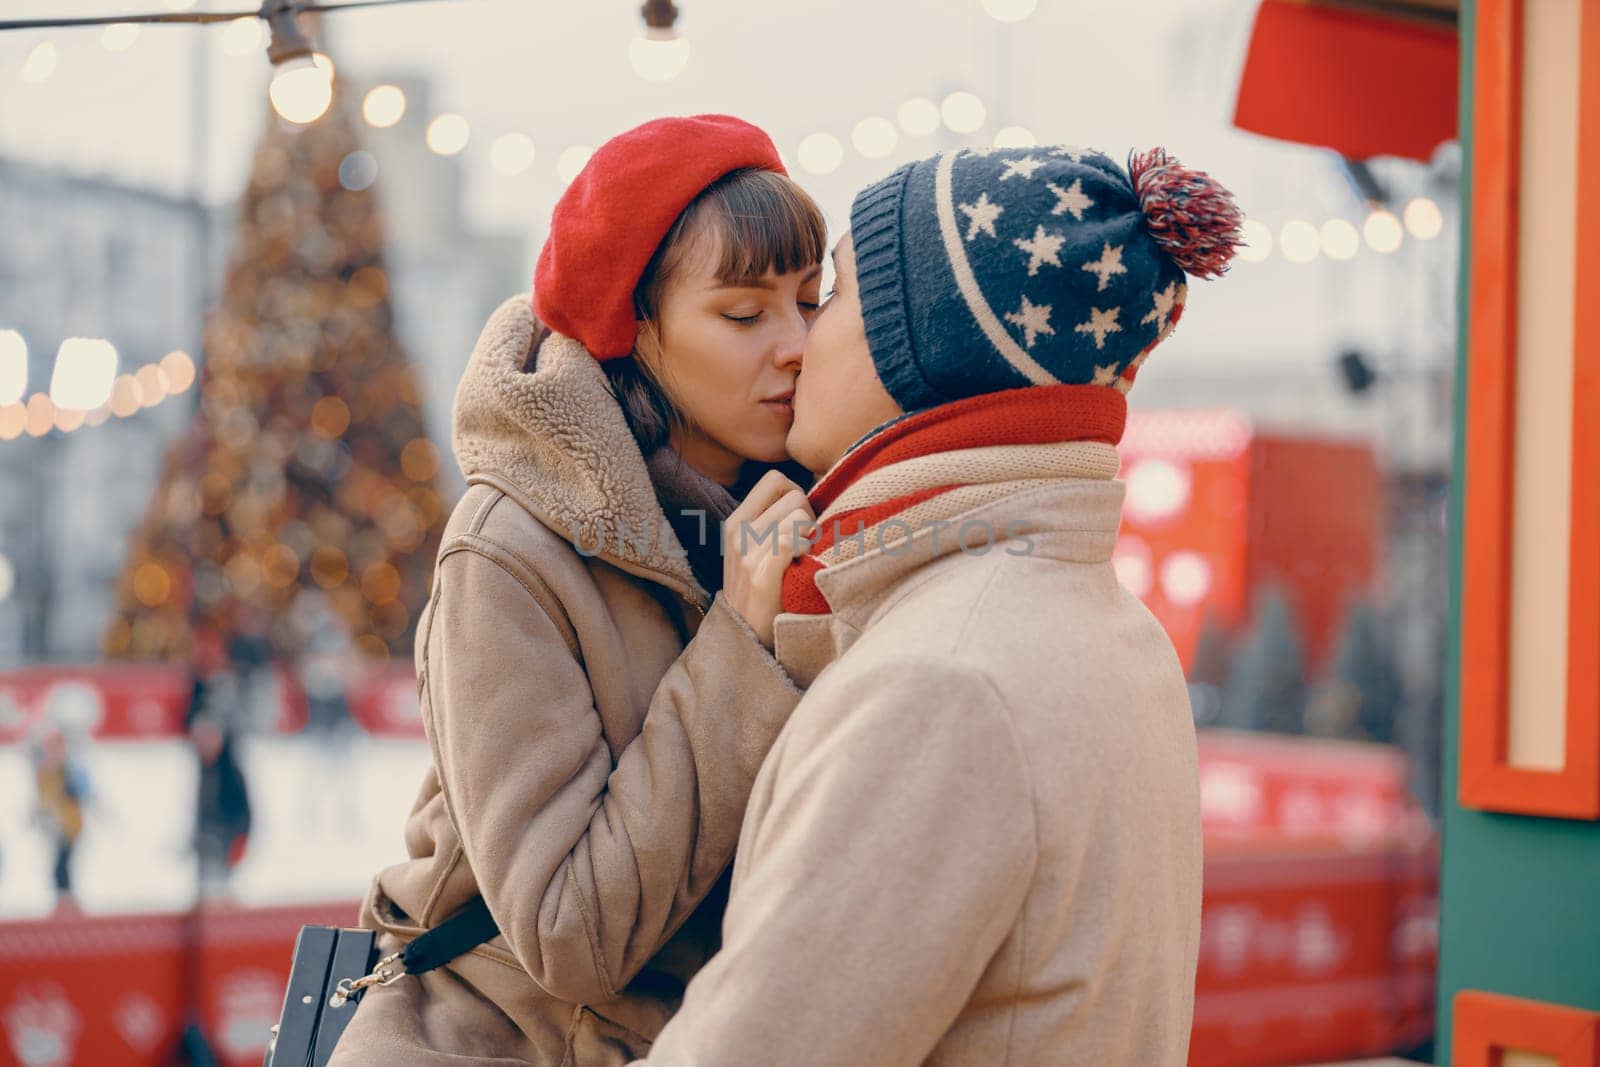 A romantic scene unfolds with a couple kissing gently amidst the twinkling lights of a holiday market, their winter attire adding warmth to the moment by Yaroslav_astakhov